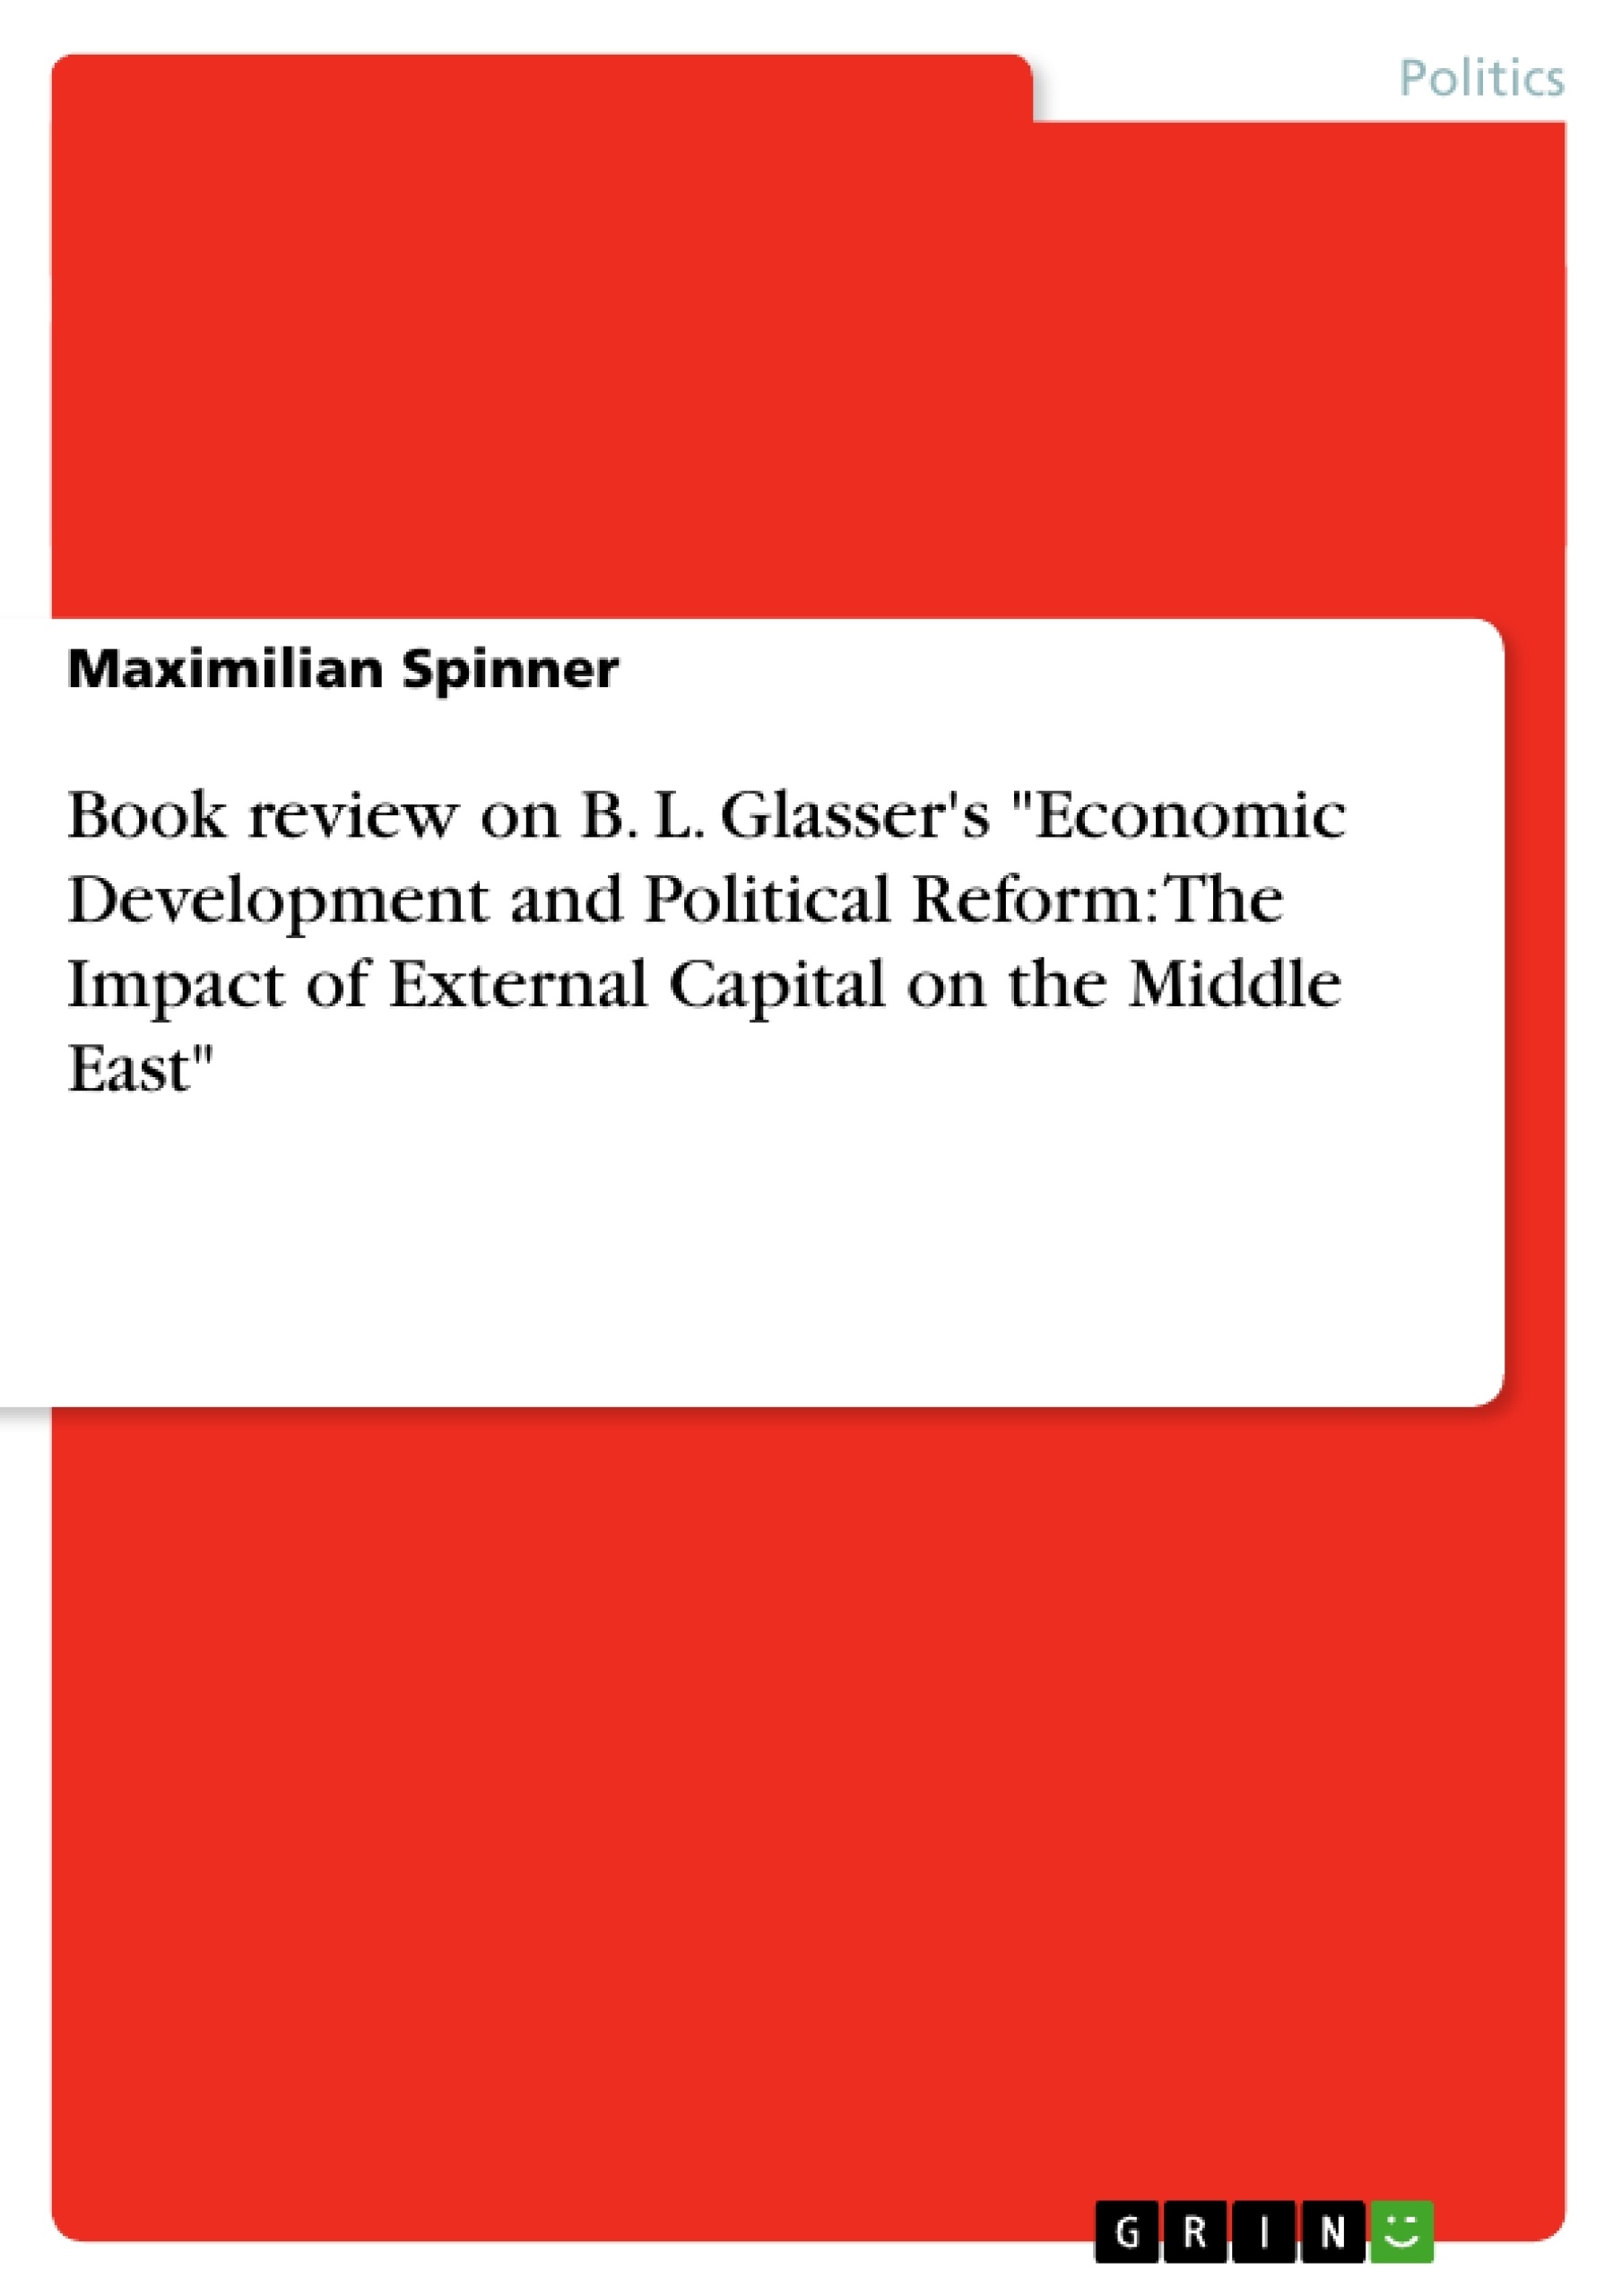 Title: Book review on  B. L. Glasser's "Economic Development and Political Reform: The Impact of External Capital on the Middle East"